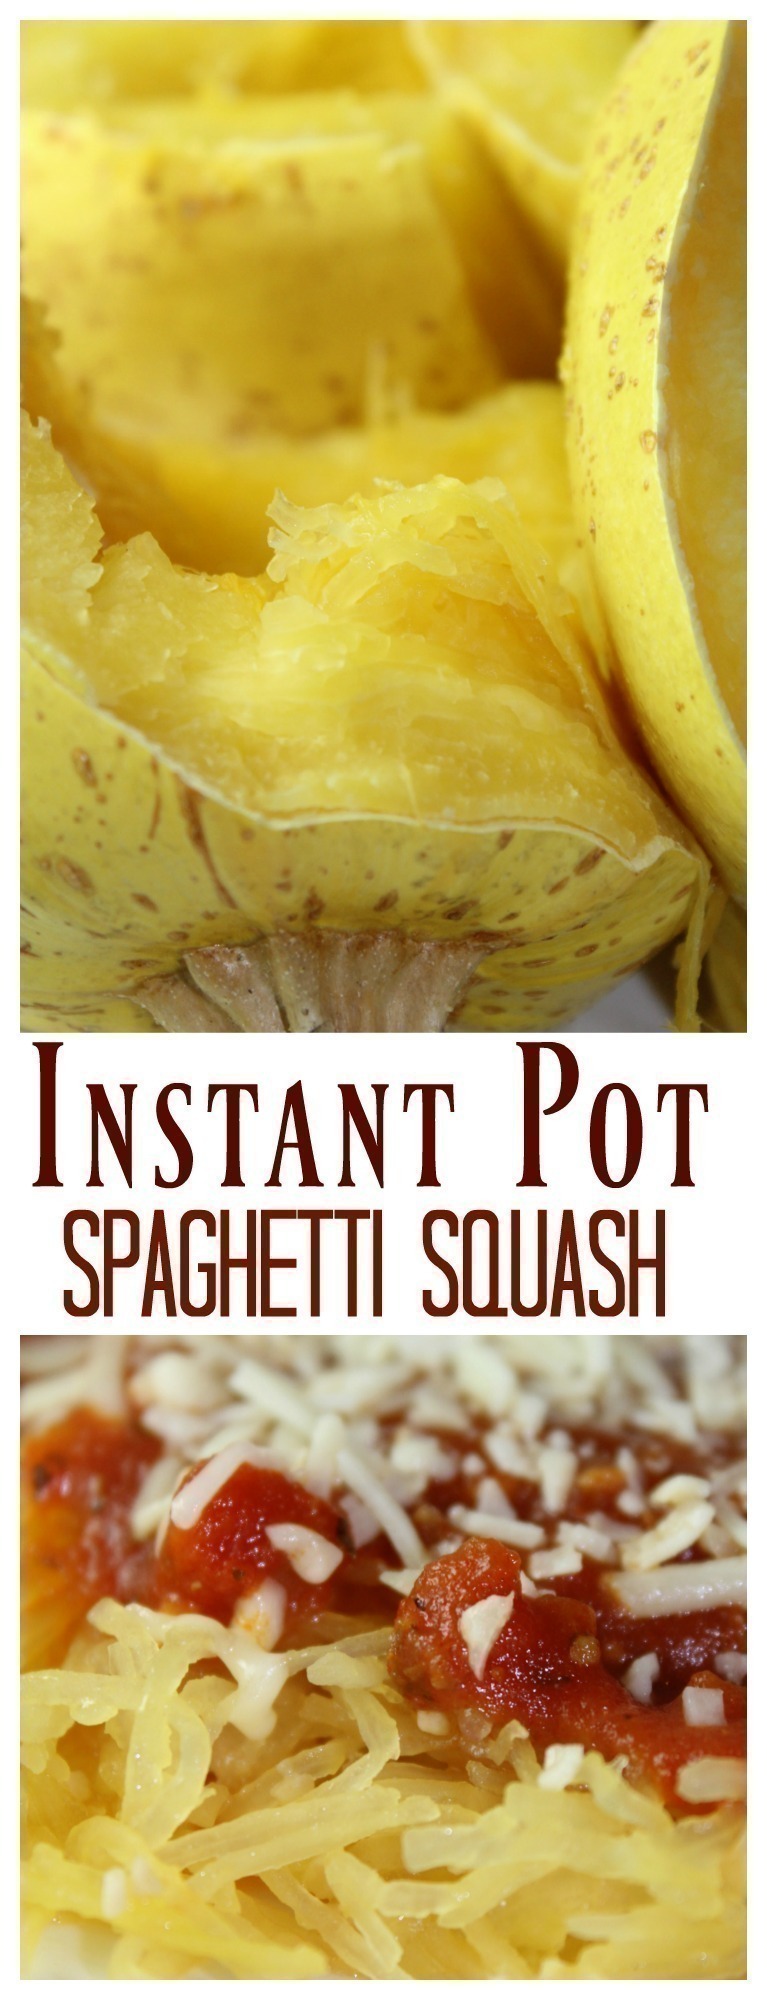 Spaghetti squash cooks up quickly and easily in less than 10 minutes in your Instant Pot.